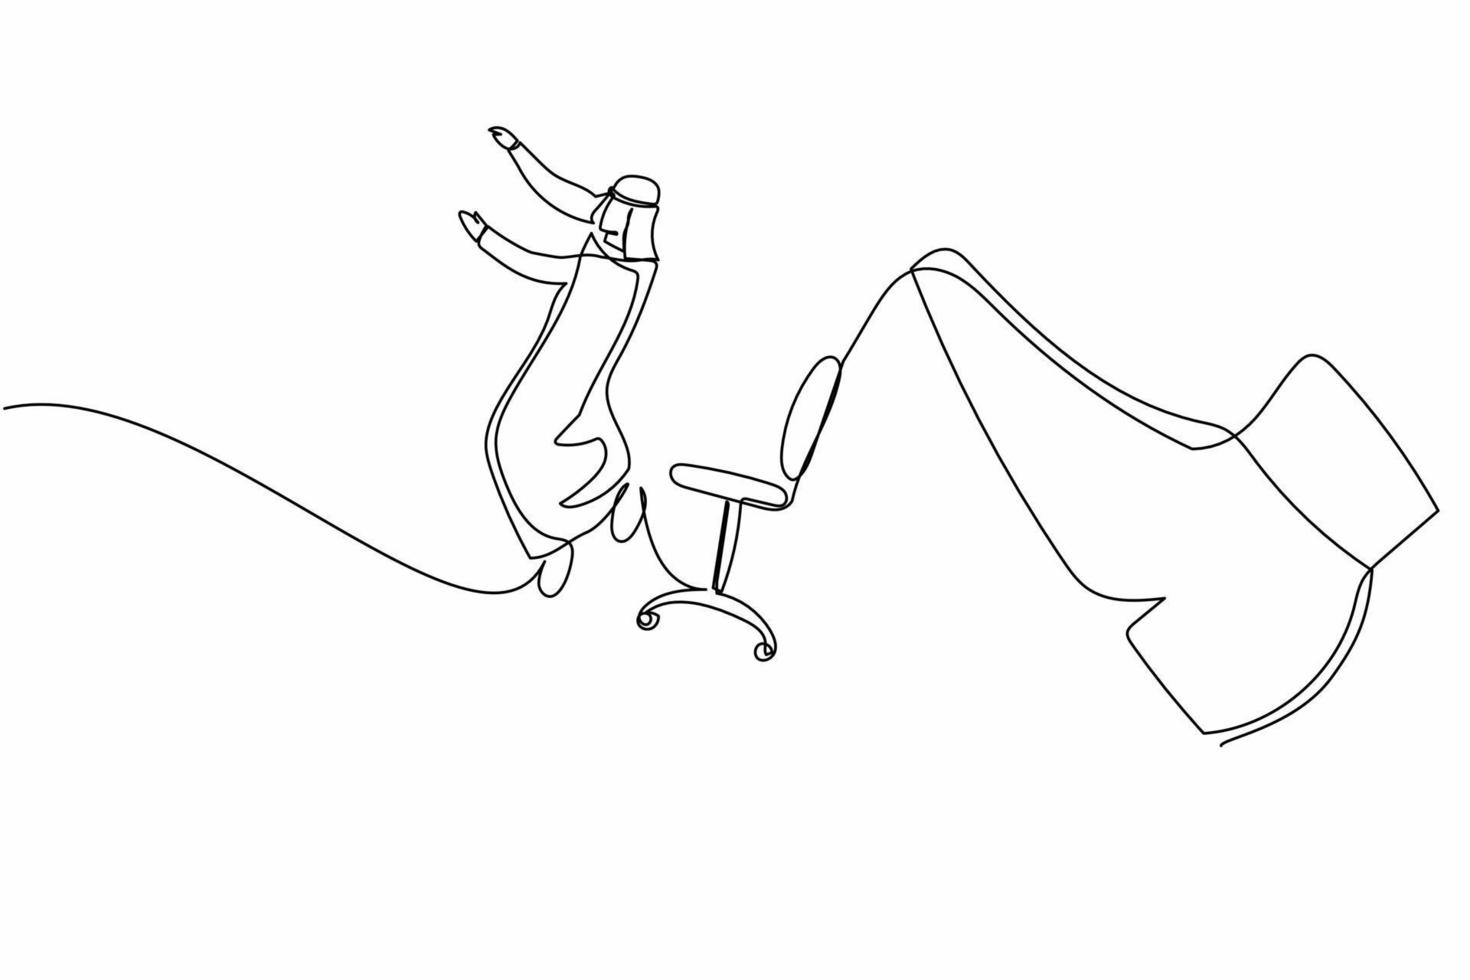 Single continuous line drawing failed small Arab businessman kicked out by big foot. Manager kick away from chair by giant feet. Minimalism metaphor. One line draw graphic design vector illustration